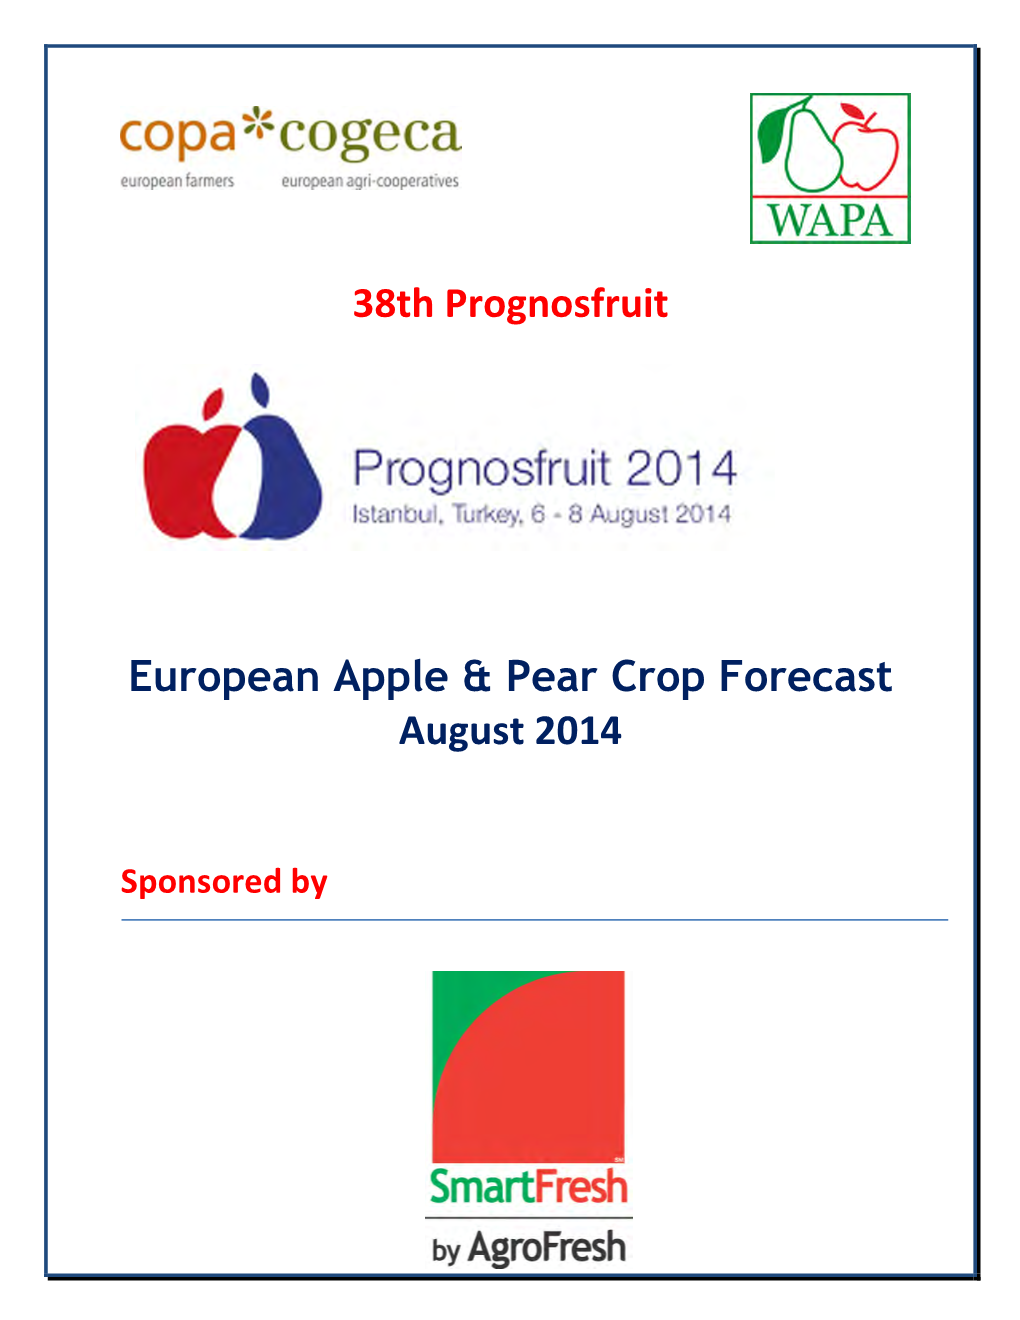 European Apple and Pear Forecast Crop Production 2014